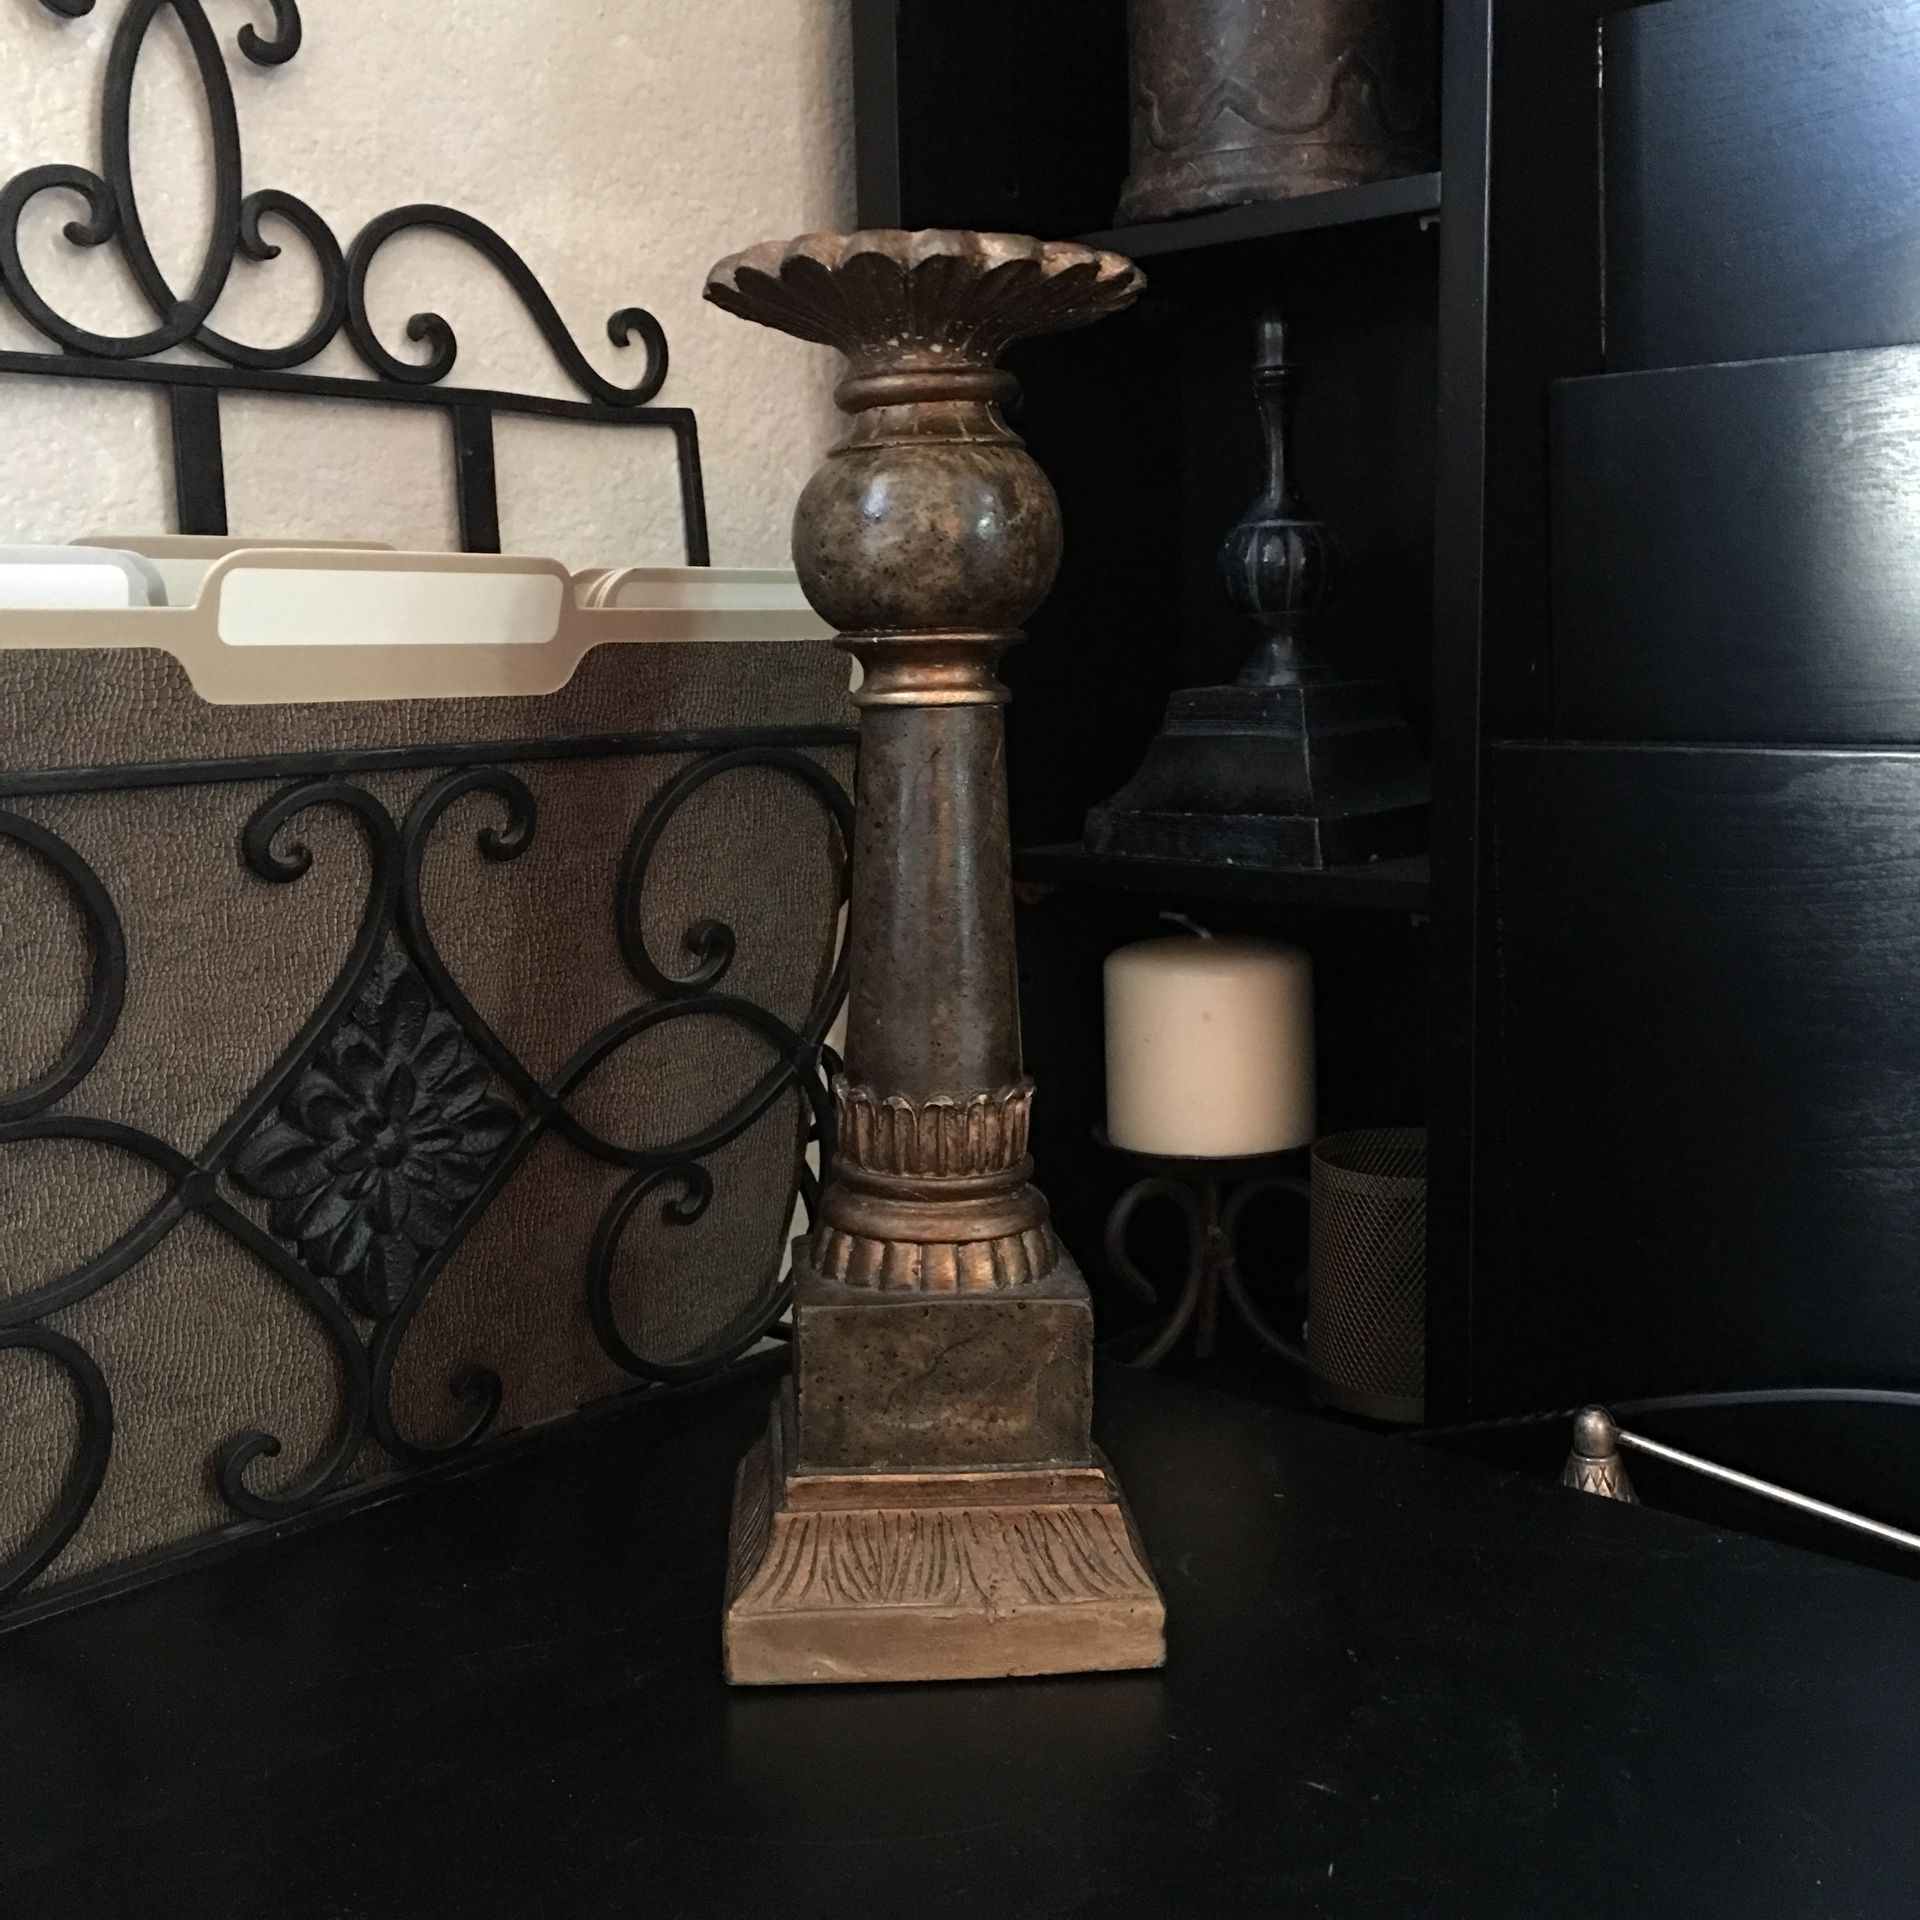 (30% off pick up) TUSCAN 11.5” H x 4” W Resin Pillar Candle Holder